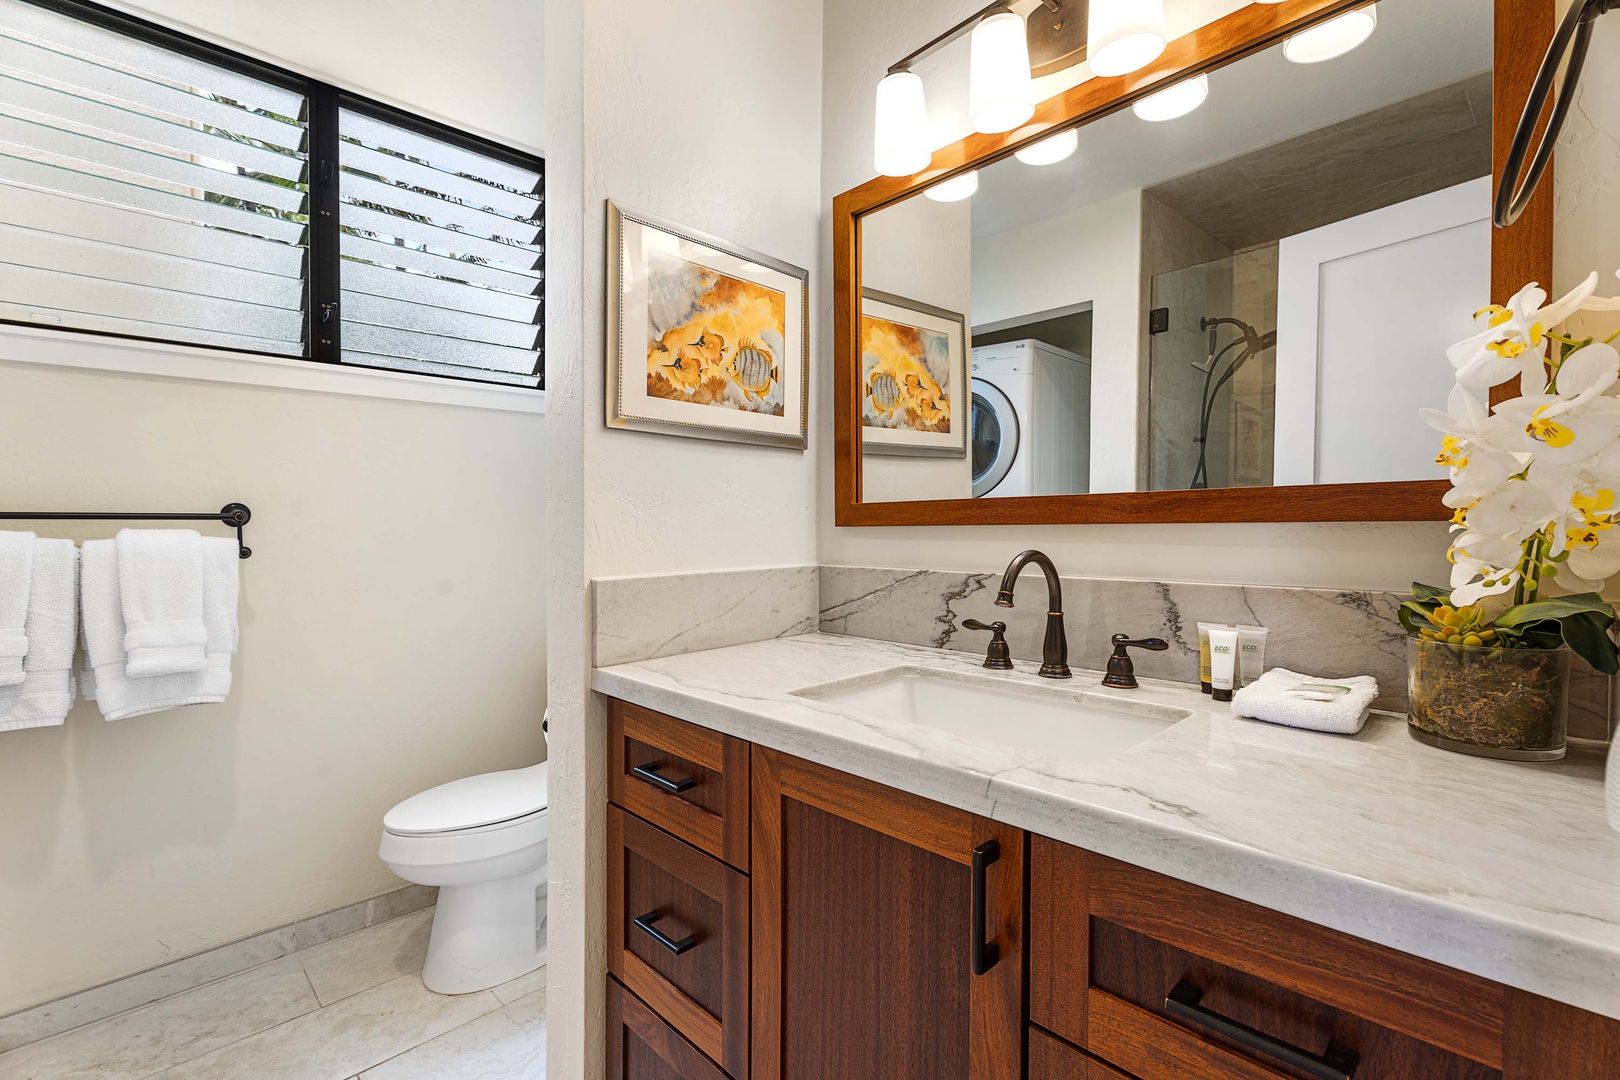 Kailua Kona Vacation Rentals, Keauhou Kona Surf & Racquet 2101 - The attached ensuite is nicely updated and includes a shower and a convenient full-size washer and dryer.